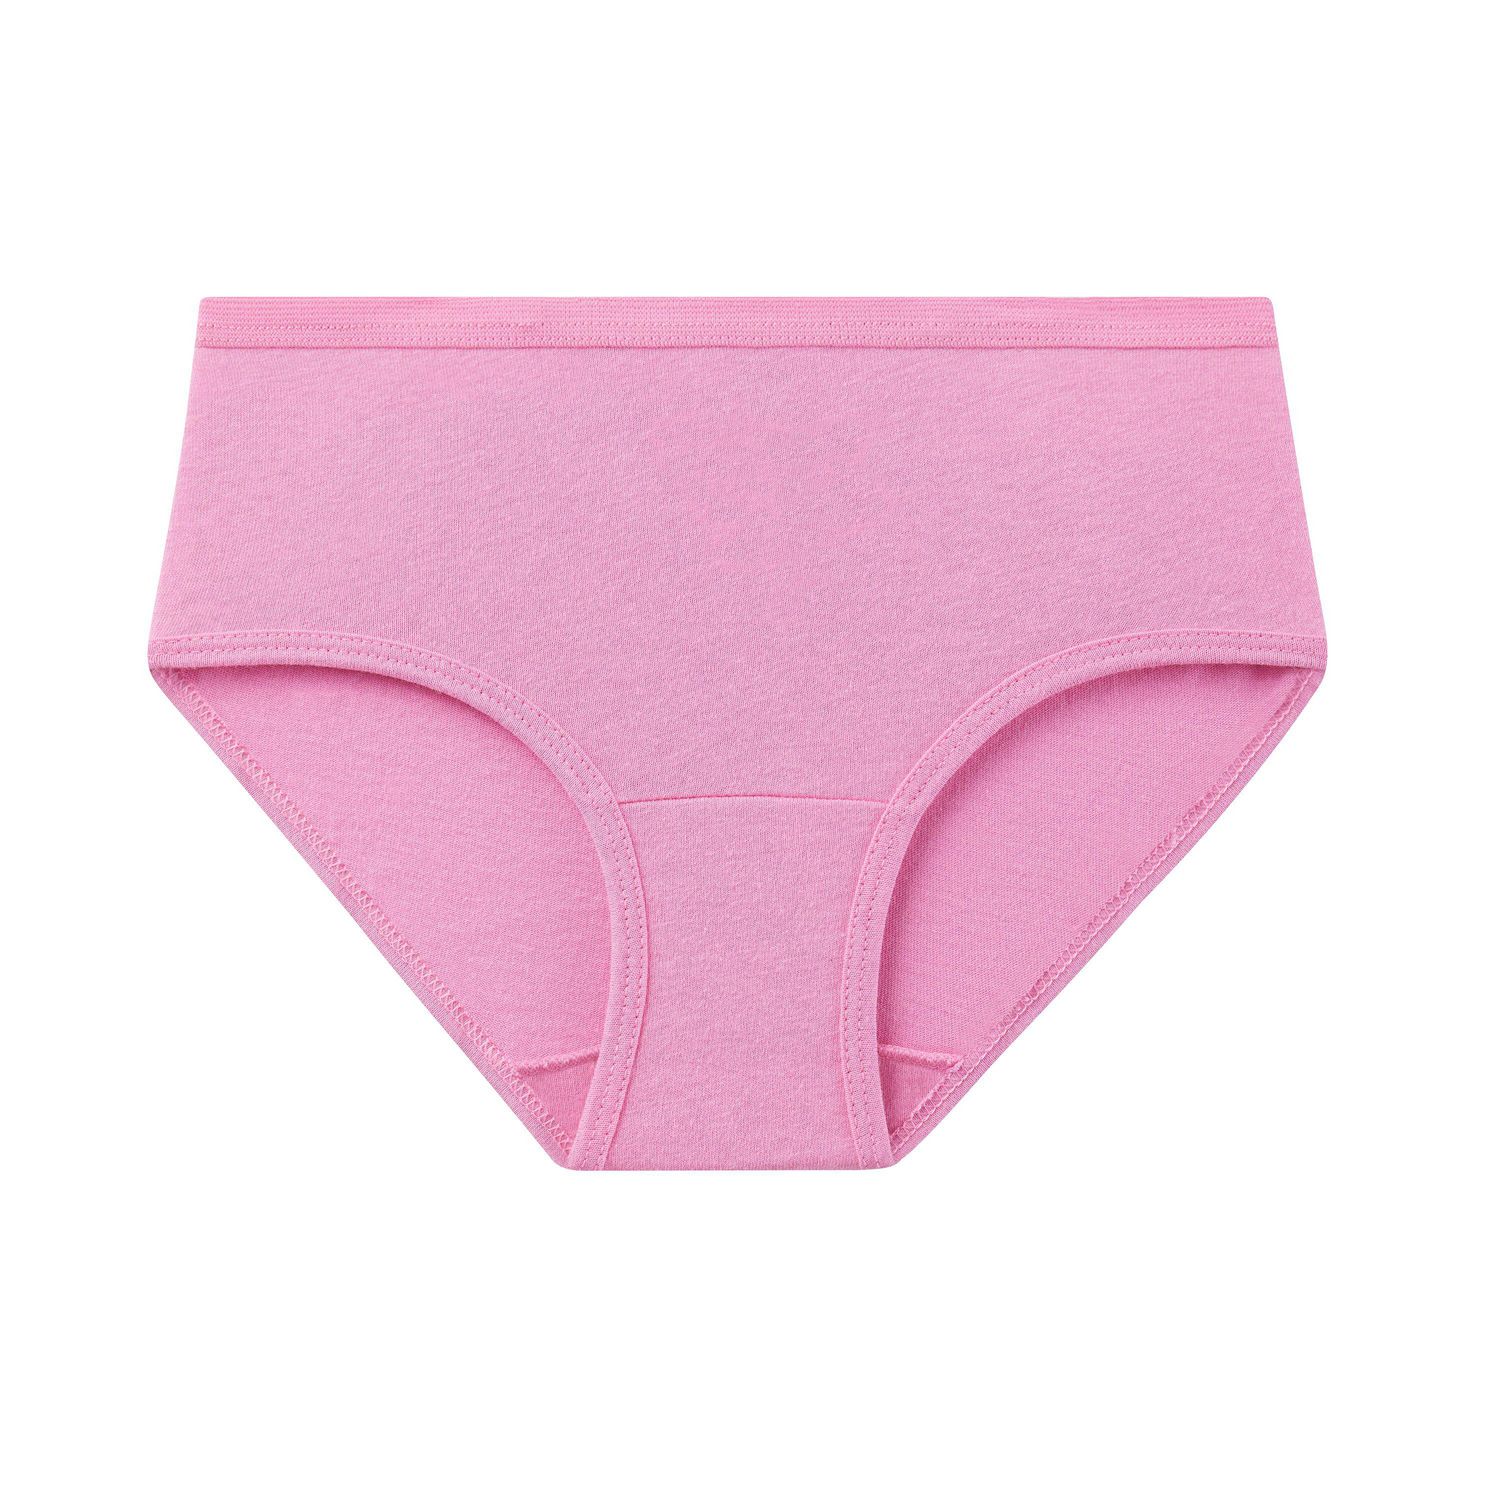 72 Bulk Fruit Of The Loom Girls Cotton Underwear Briefs In Assorted Colors  And Sizes